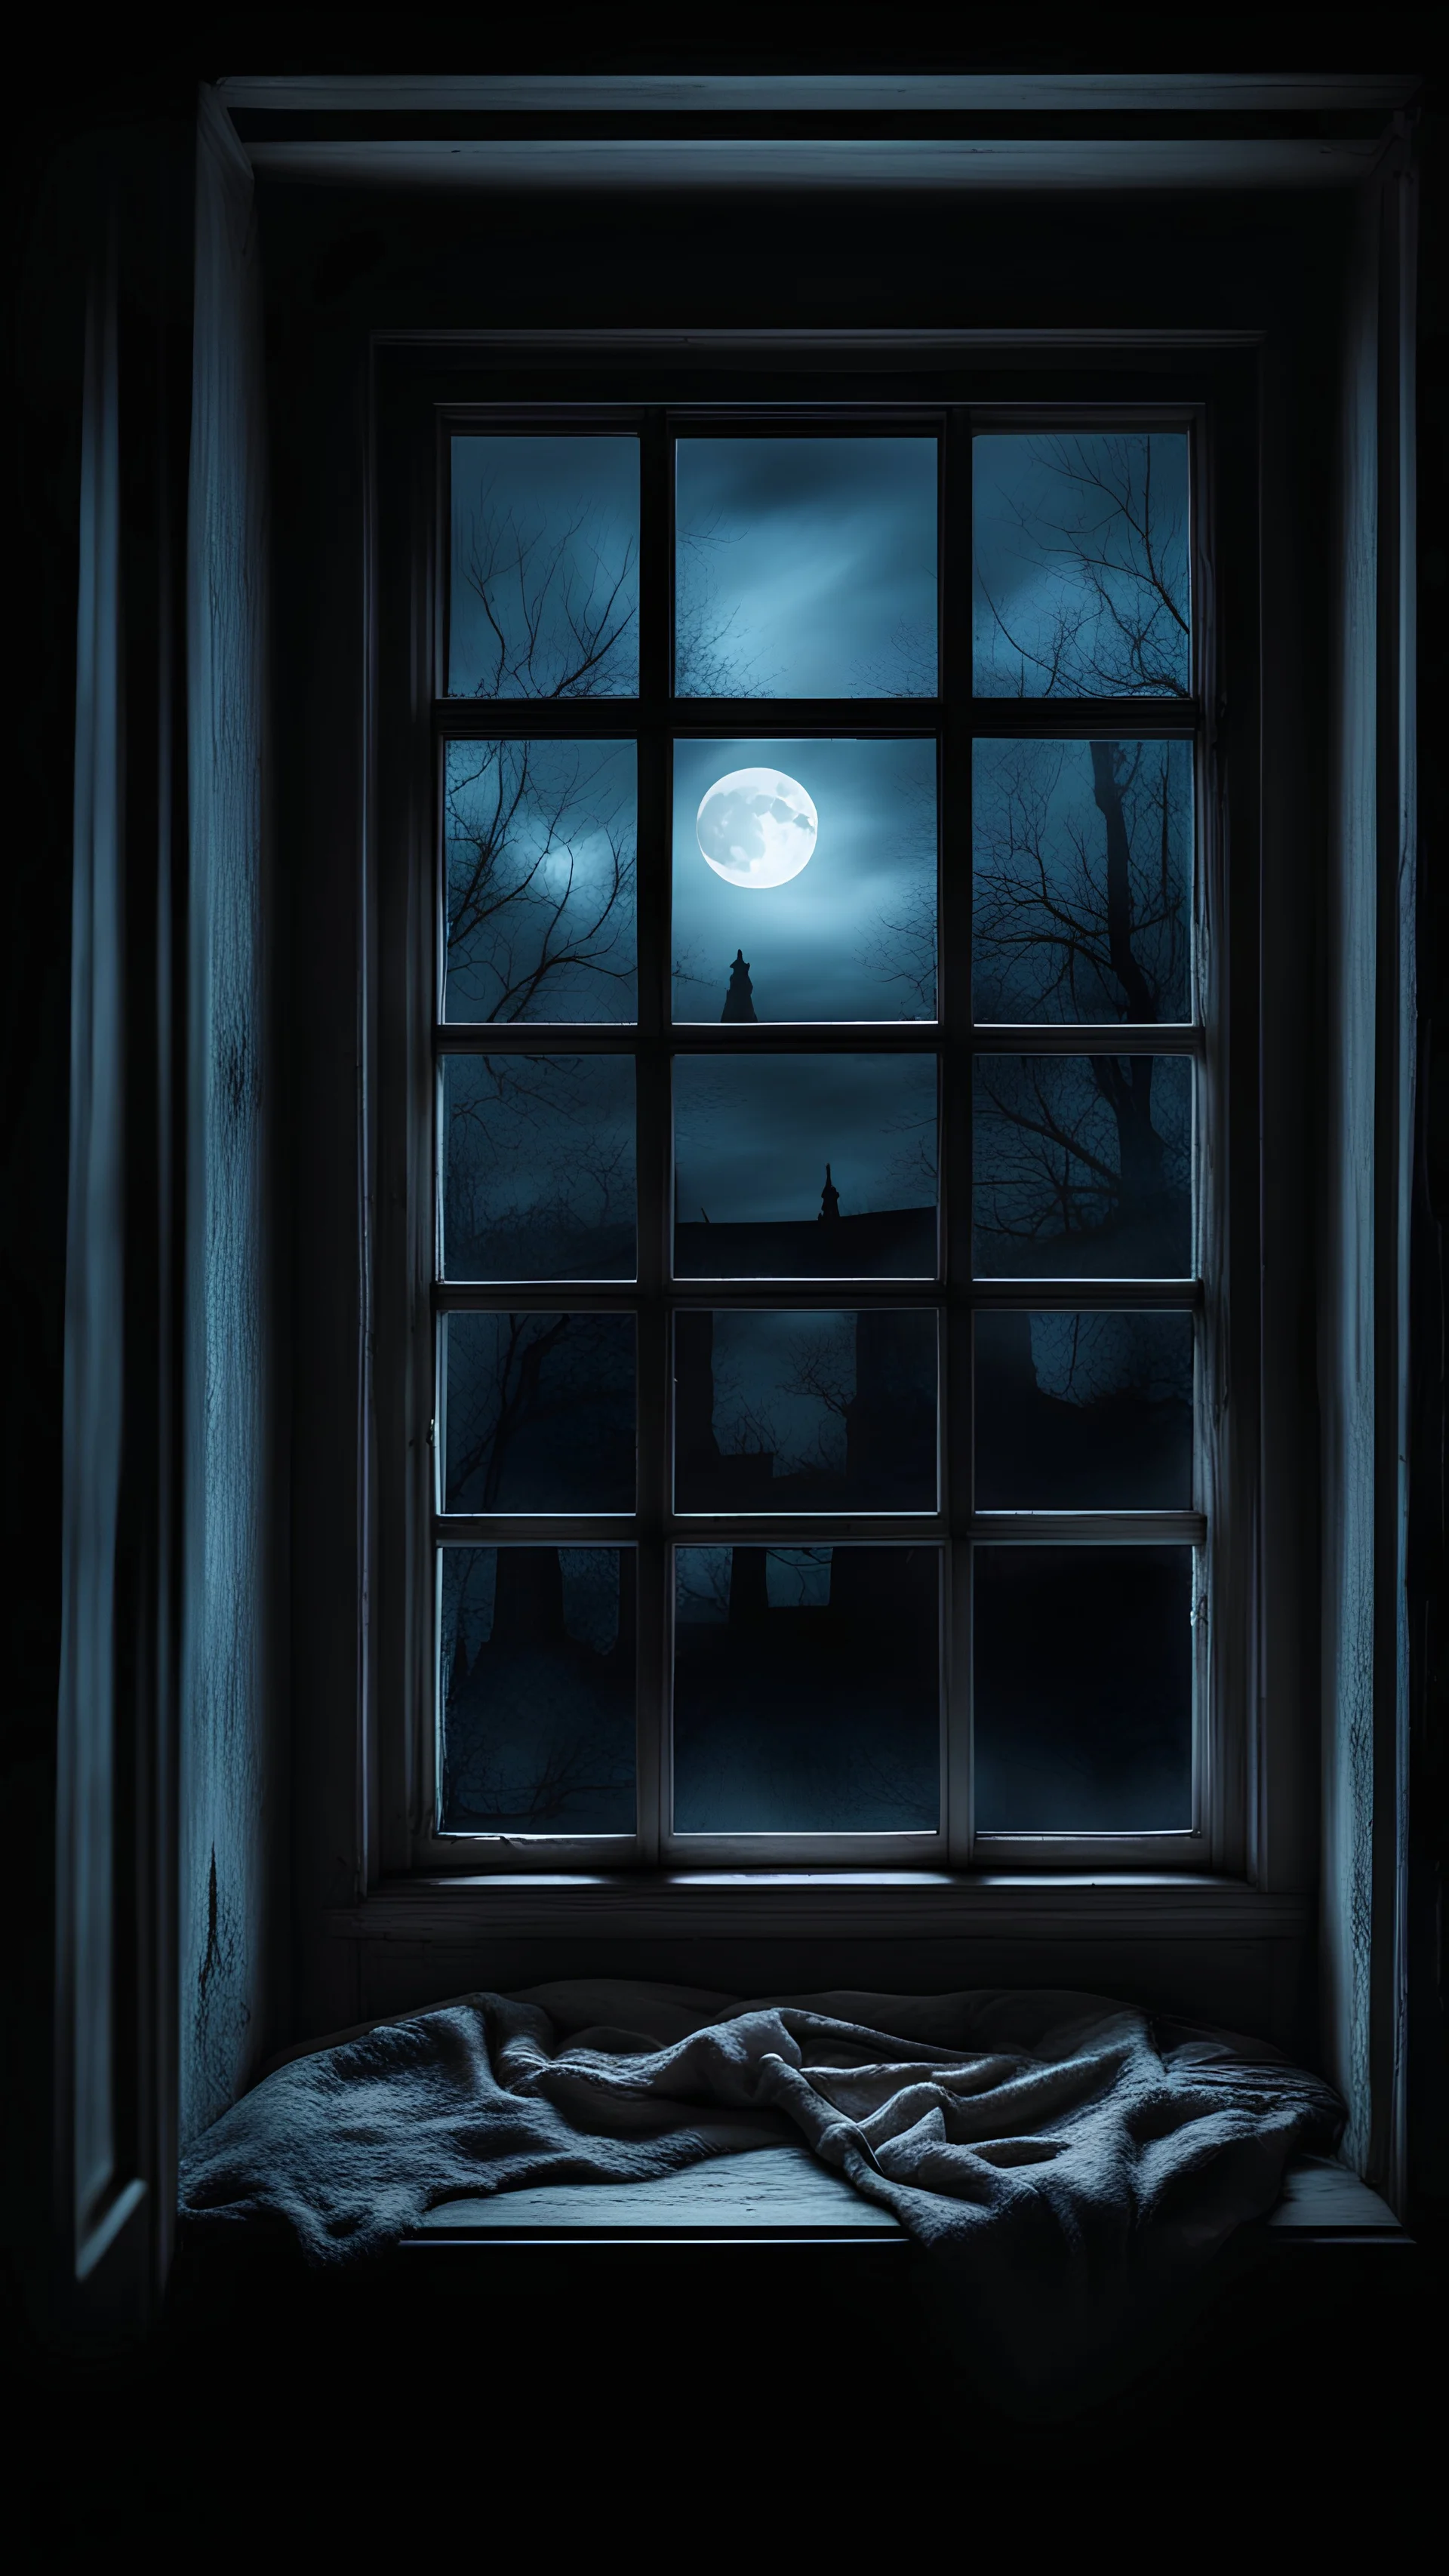 From the room of an old house in window at night in the style of a horror film